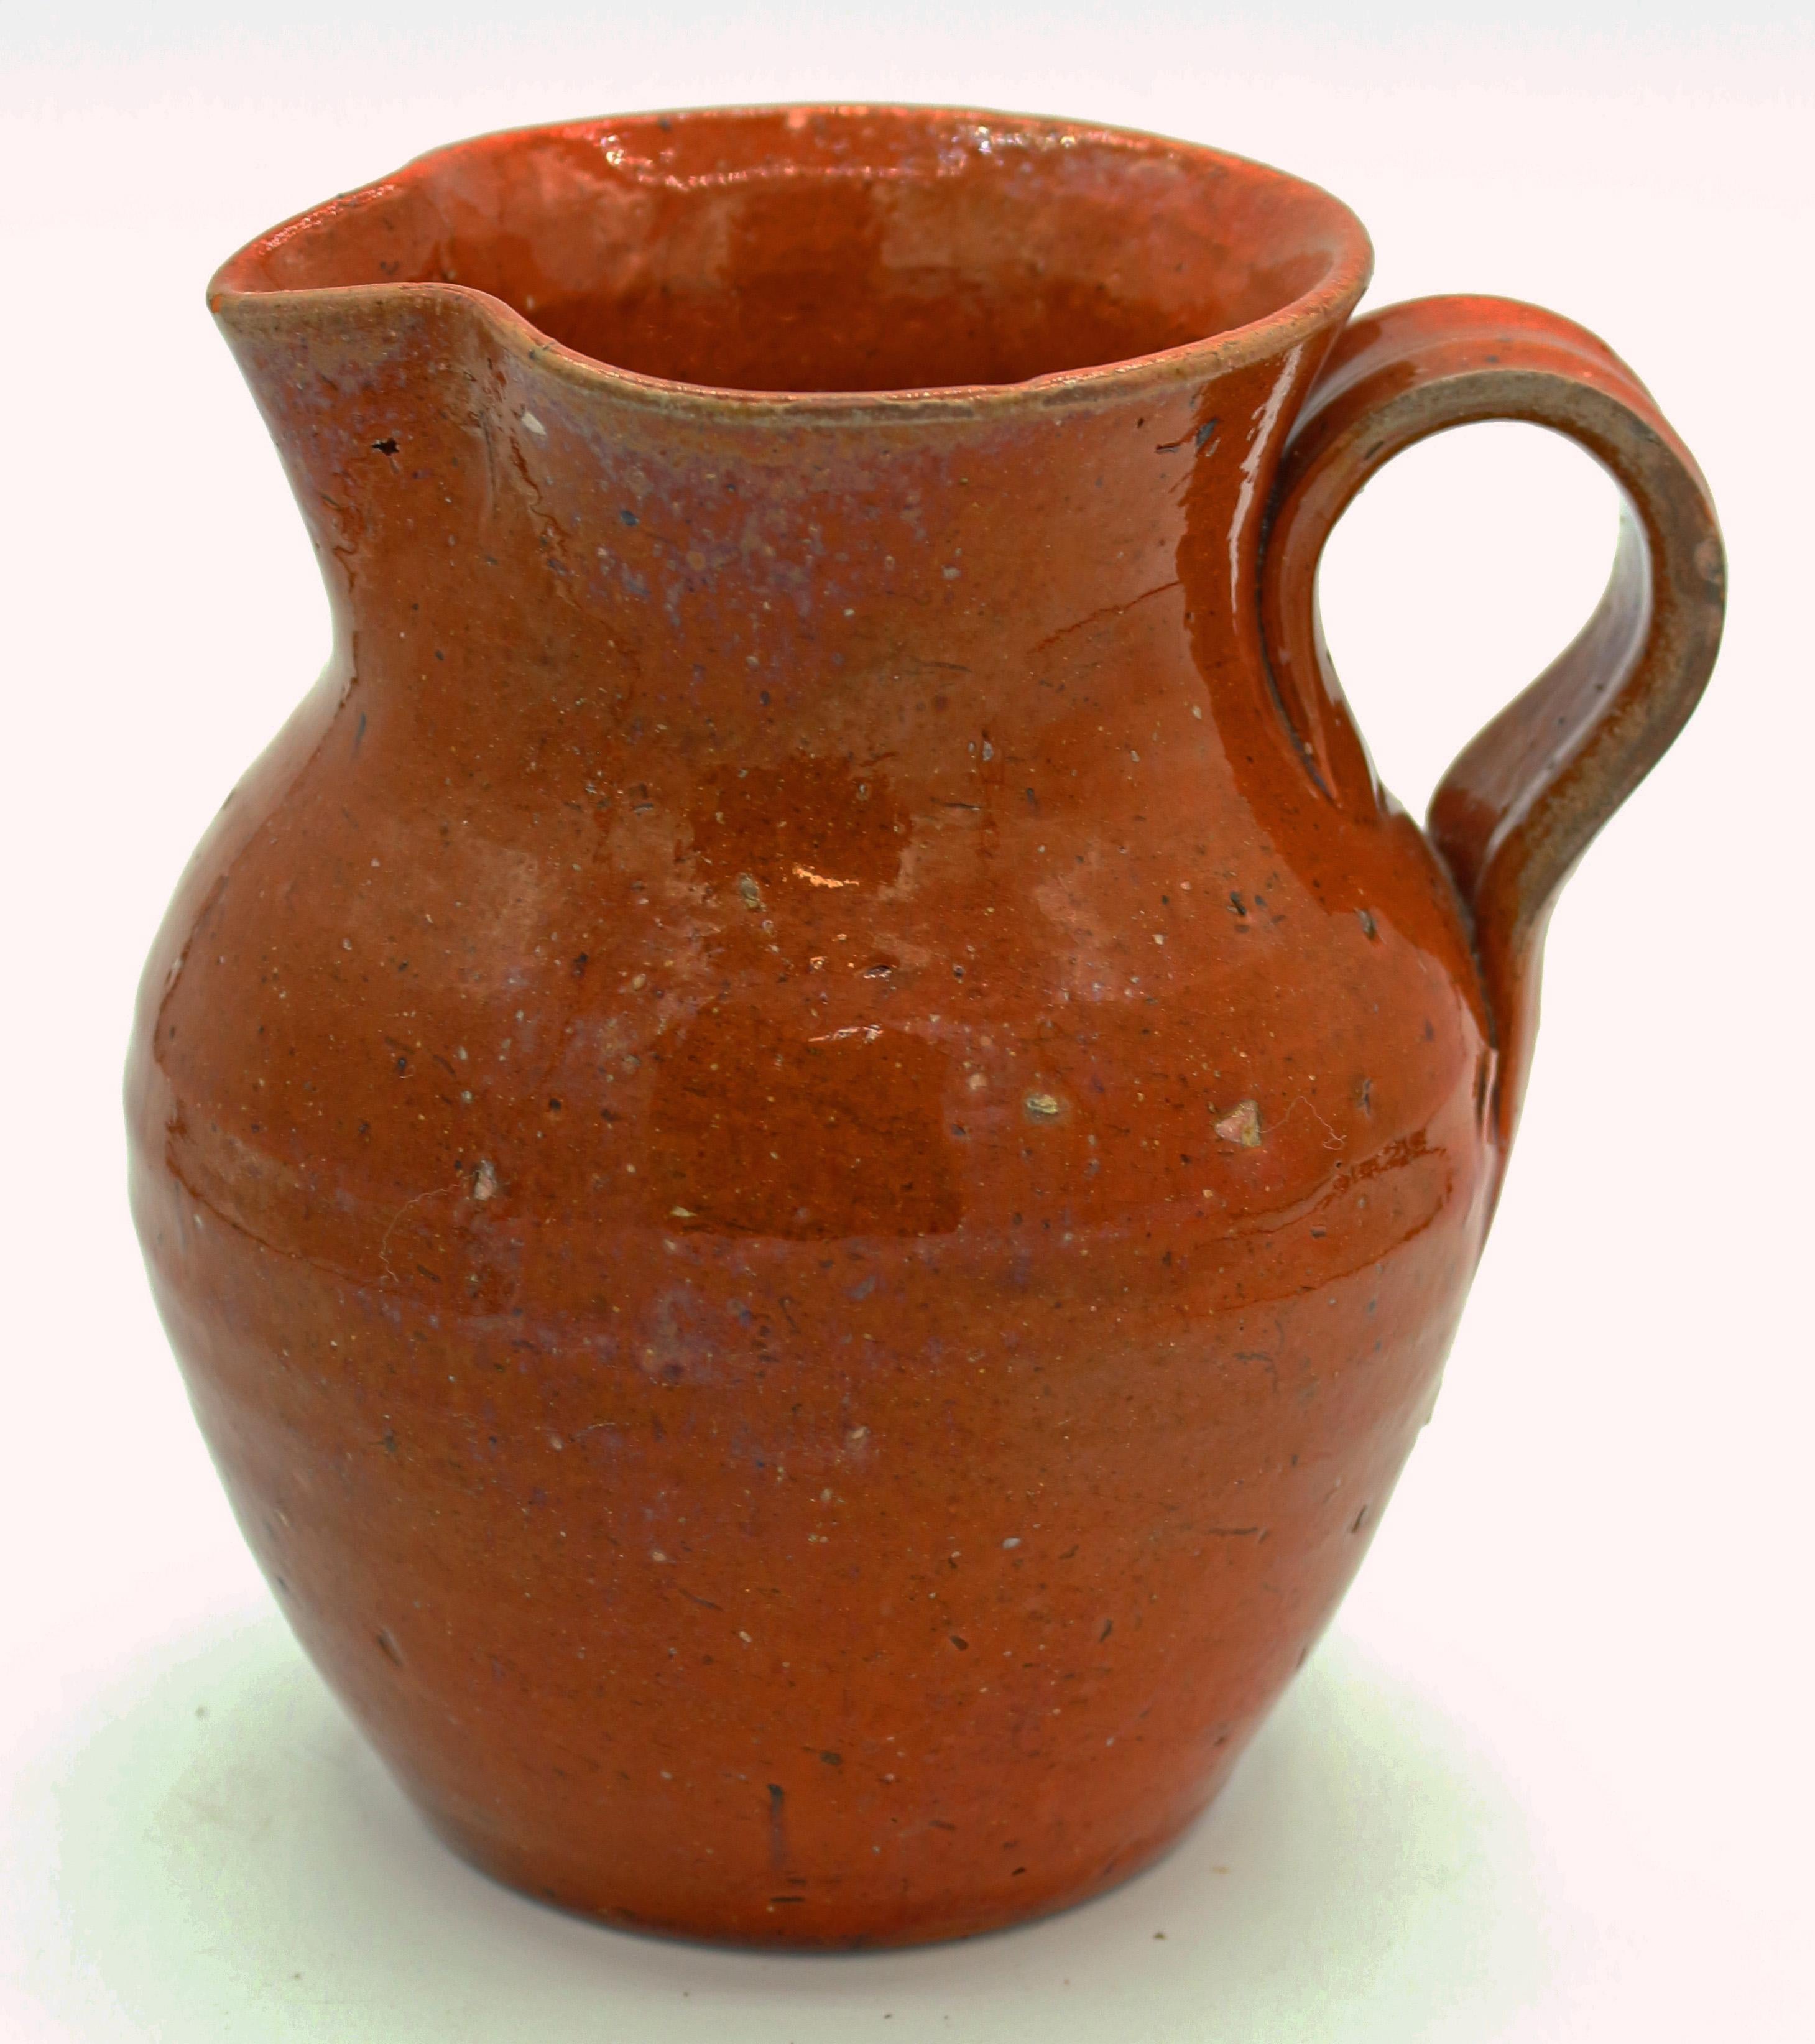 c.1930-50s pottery orange glazed pitcher with strap handle by Ben Owen I, Jugtown Ware, 1st Jugtown stamp. Minute 1/8